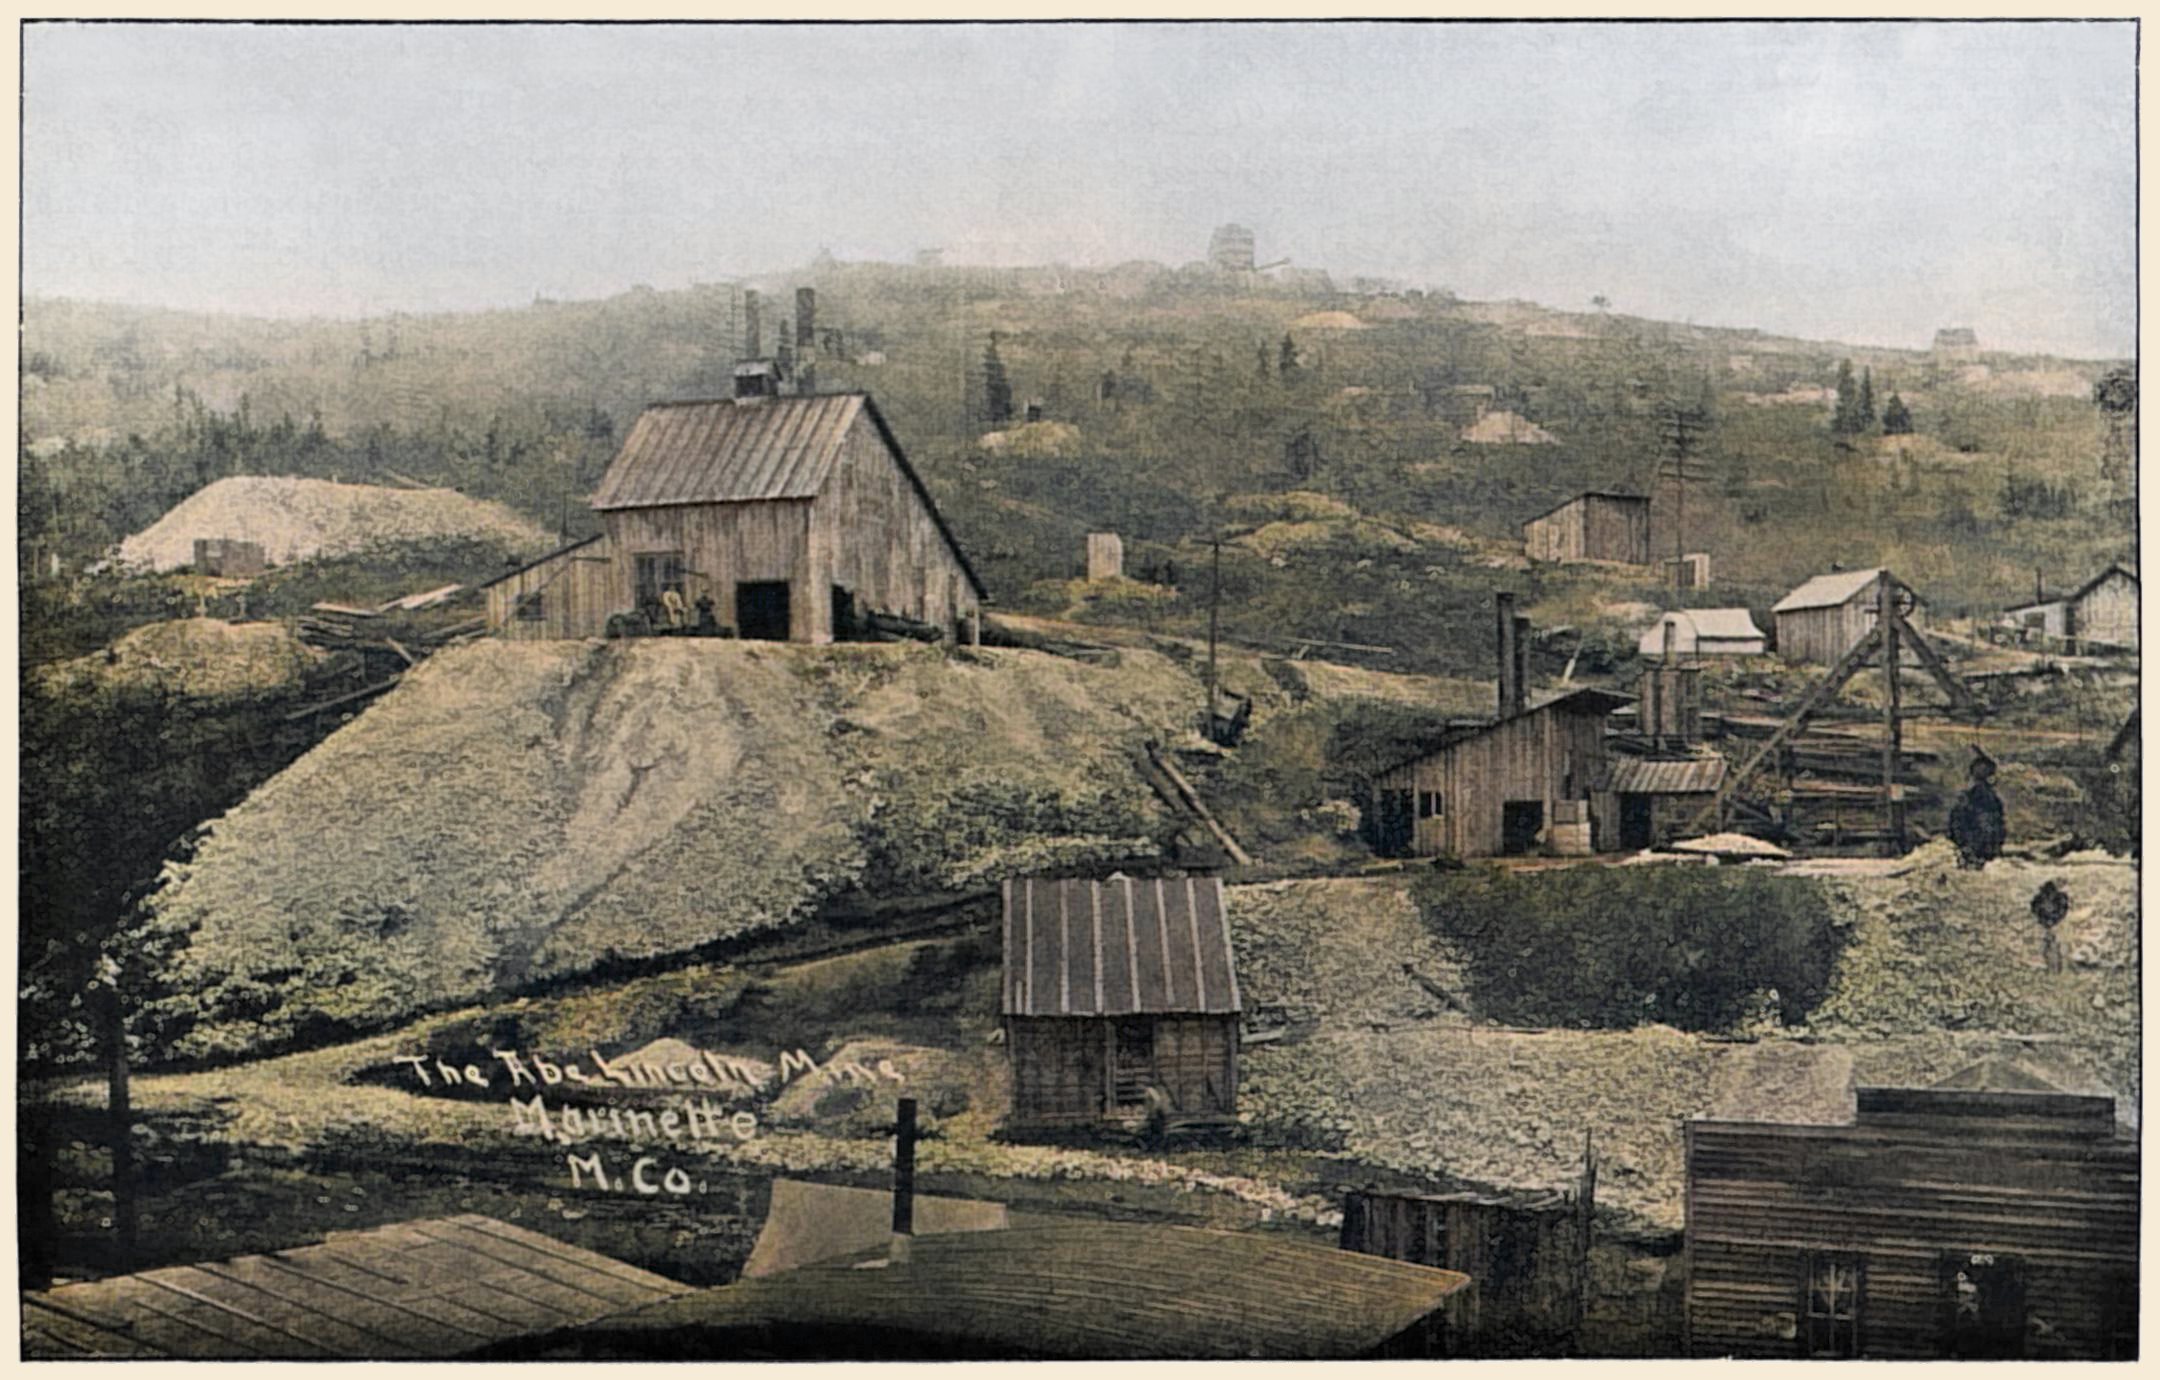 This is an early view of the Abe Lincoln Mine in Poverty Gulch, at this time owned and operated by the Marinette Mining Company, organized by the Arnold brothers. The Abe Lincoln was located May 9, 1895 by E. S. Arnold, a United States deputy mineral surveyor, and his two brothers, Ralph R. and Joe C.
   This according to text in a book from 1896, which provided this image. Being such a source, the quality is not that great, but I think it came out as good as I can expect it. In this view there are two shafts, the one with the larger Shaft house which has filled out its own level ground out from the original ridge, seen about 1/3 in from left and top. And the No. 2 shaft, which is lower, smaller, has a Hoist house carved into the hillside and a visible Headframe, seen about 1/6 in from right-hand side. Situated between them, at bottom of Poverty Gulch is the Ore house, but soon there will be a bigger ore house directly linked to the main shaft house.
   In the foreground some of the houses, structures of Poverty Gulch are seen as roofs only and one front of a typical 'wild west' type belonging to some unknown business I assume. In the background is Gold Hill with lots of smaller dumps and at top the large Shaft house of the Anchoria-Leland is easy to recognize!
   I did procure the colored version of this image. Source was grayish, or in common speech black & white. Used an online service and tweaked and worked with image to get what looks best to my eyes at the moment.